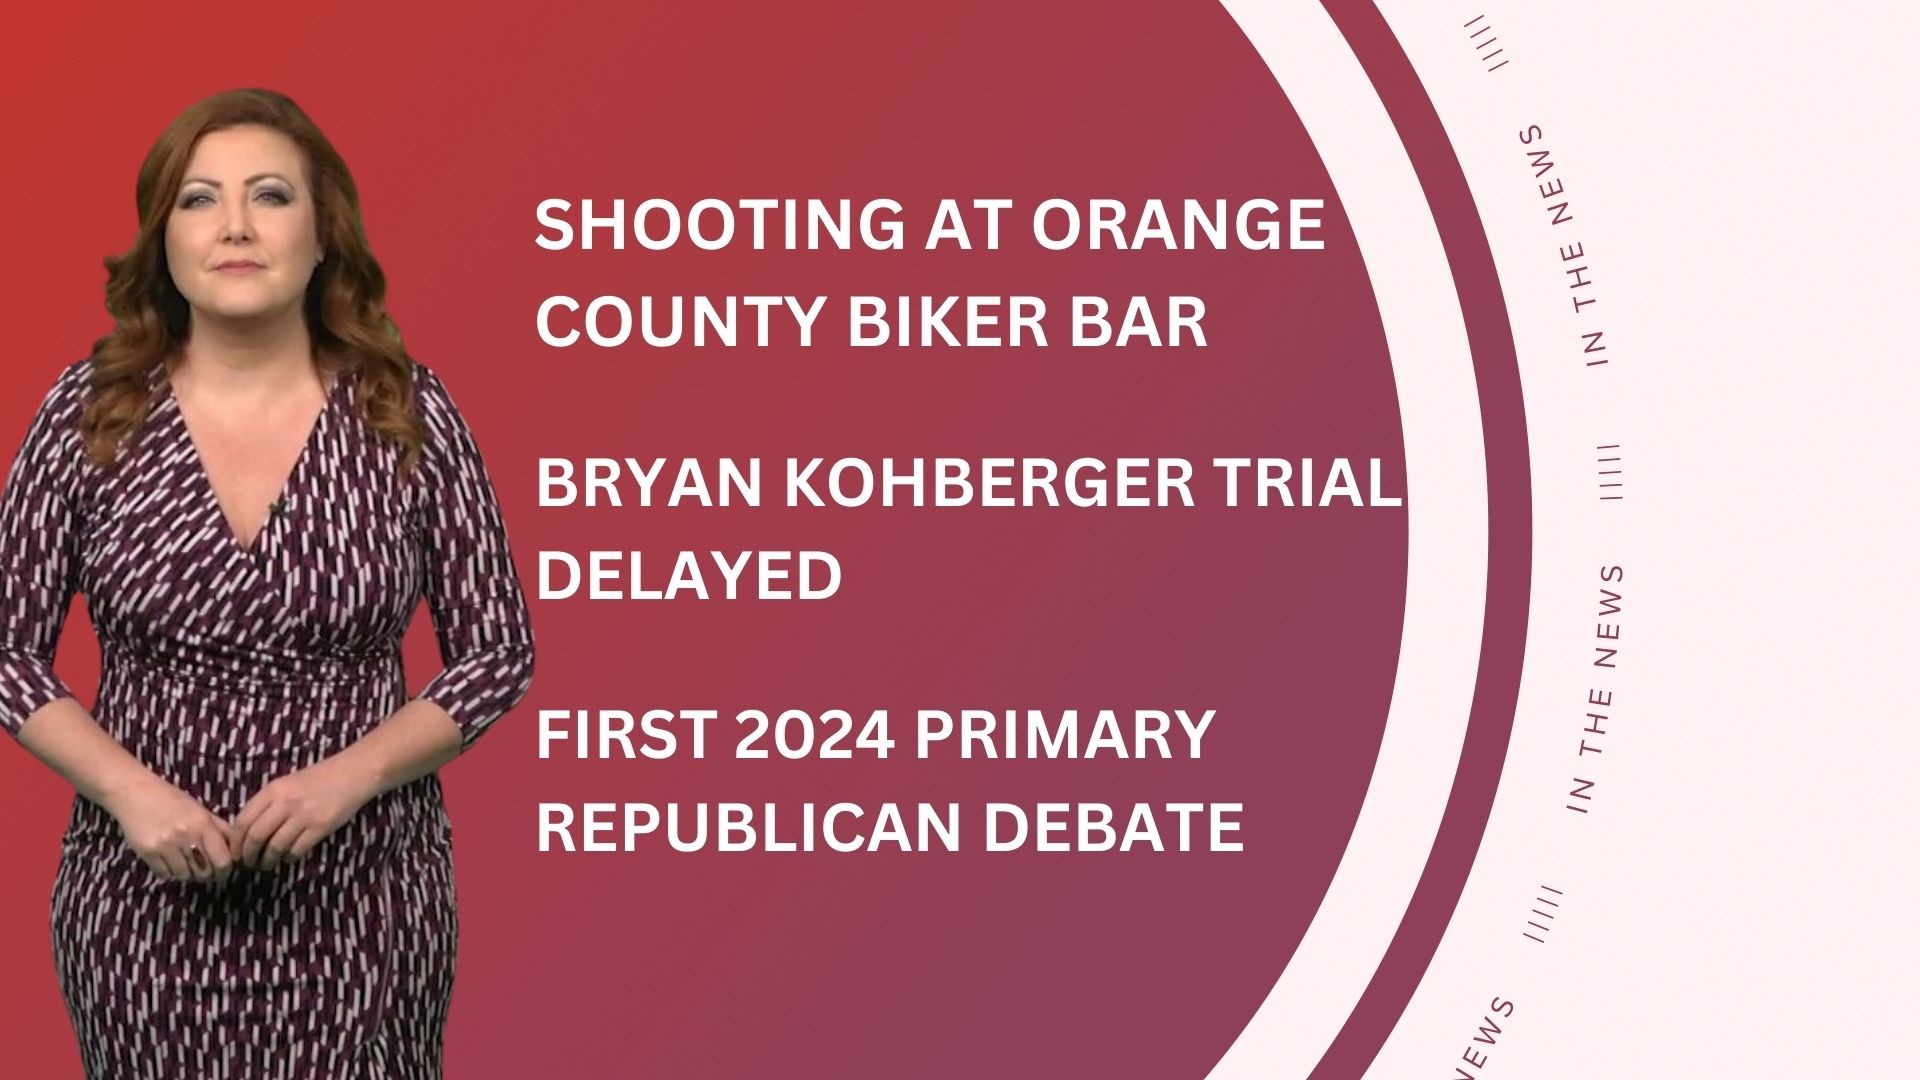 A look at what is happening in the news from a deadly shooting at a biker bar to the first GOP primary debate and Starbucks welcomes back the pumpkin spice latte.